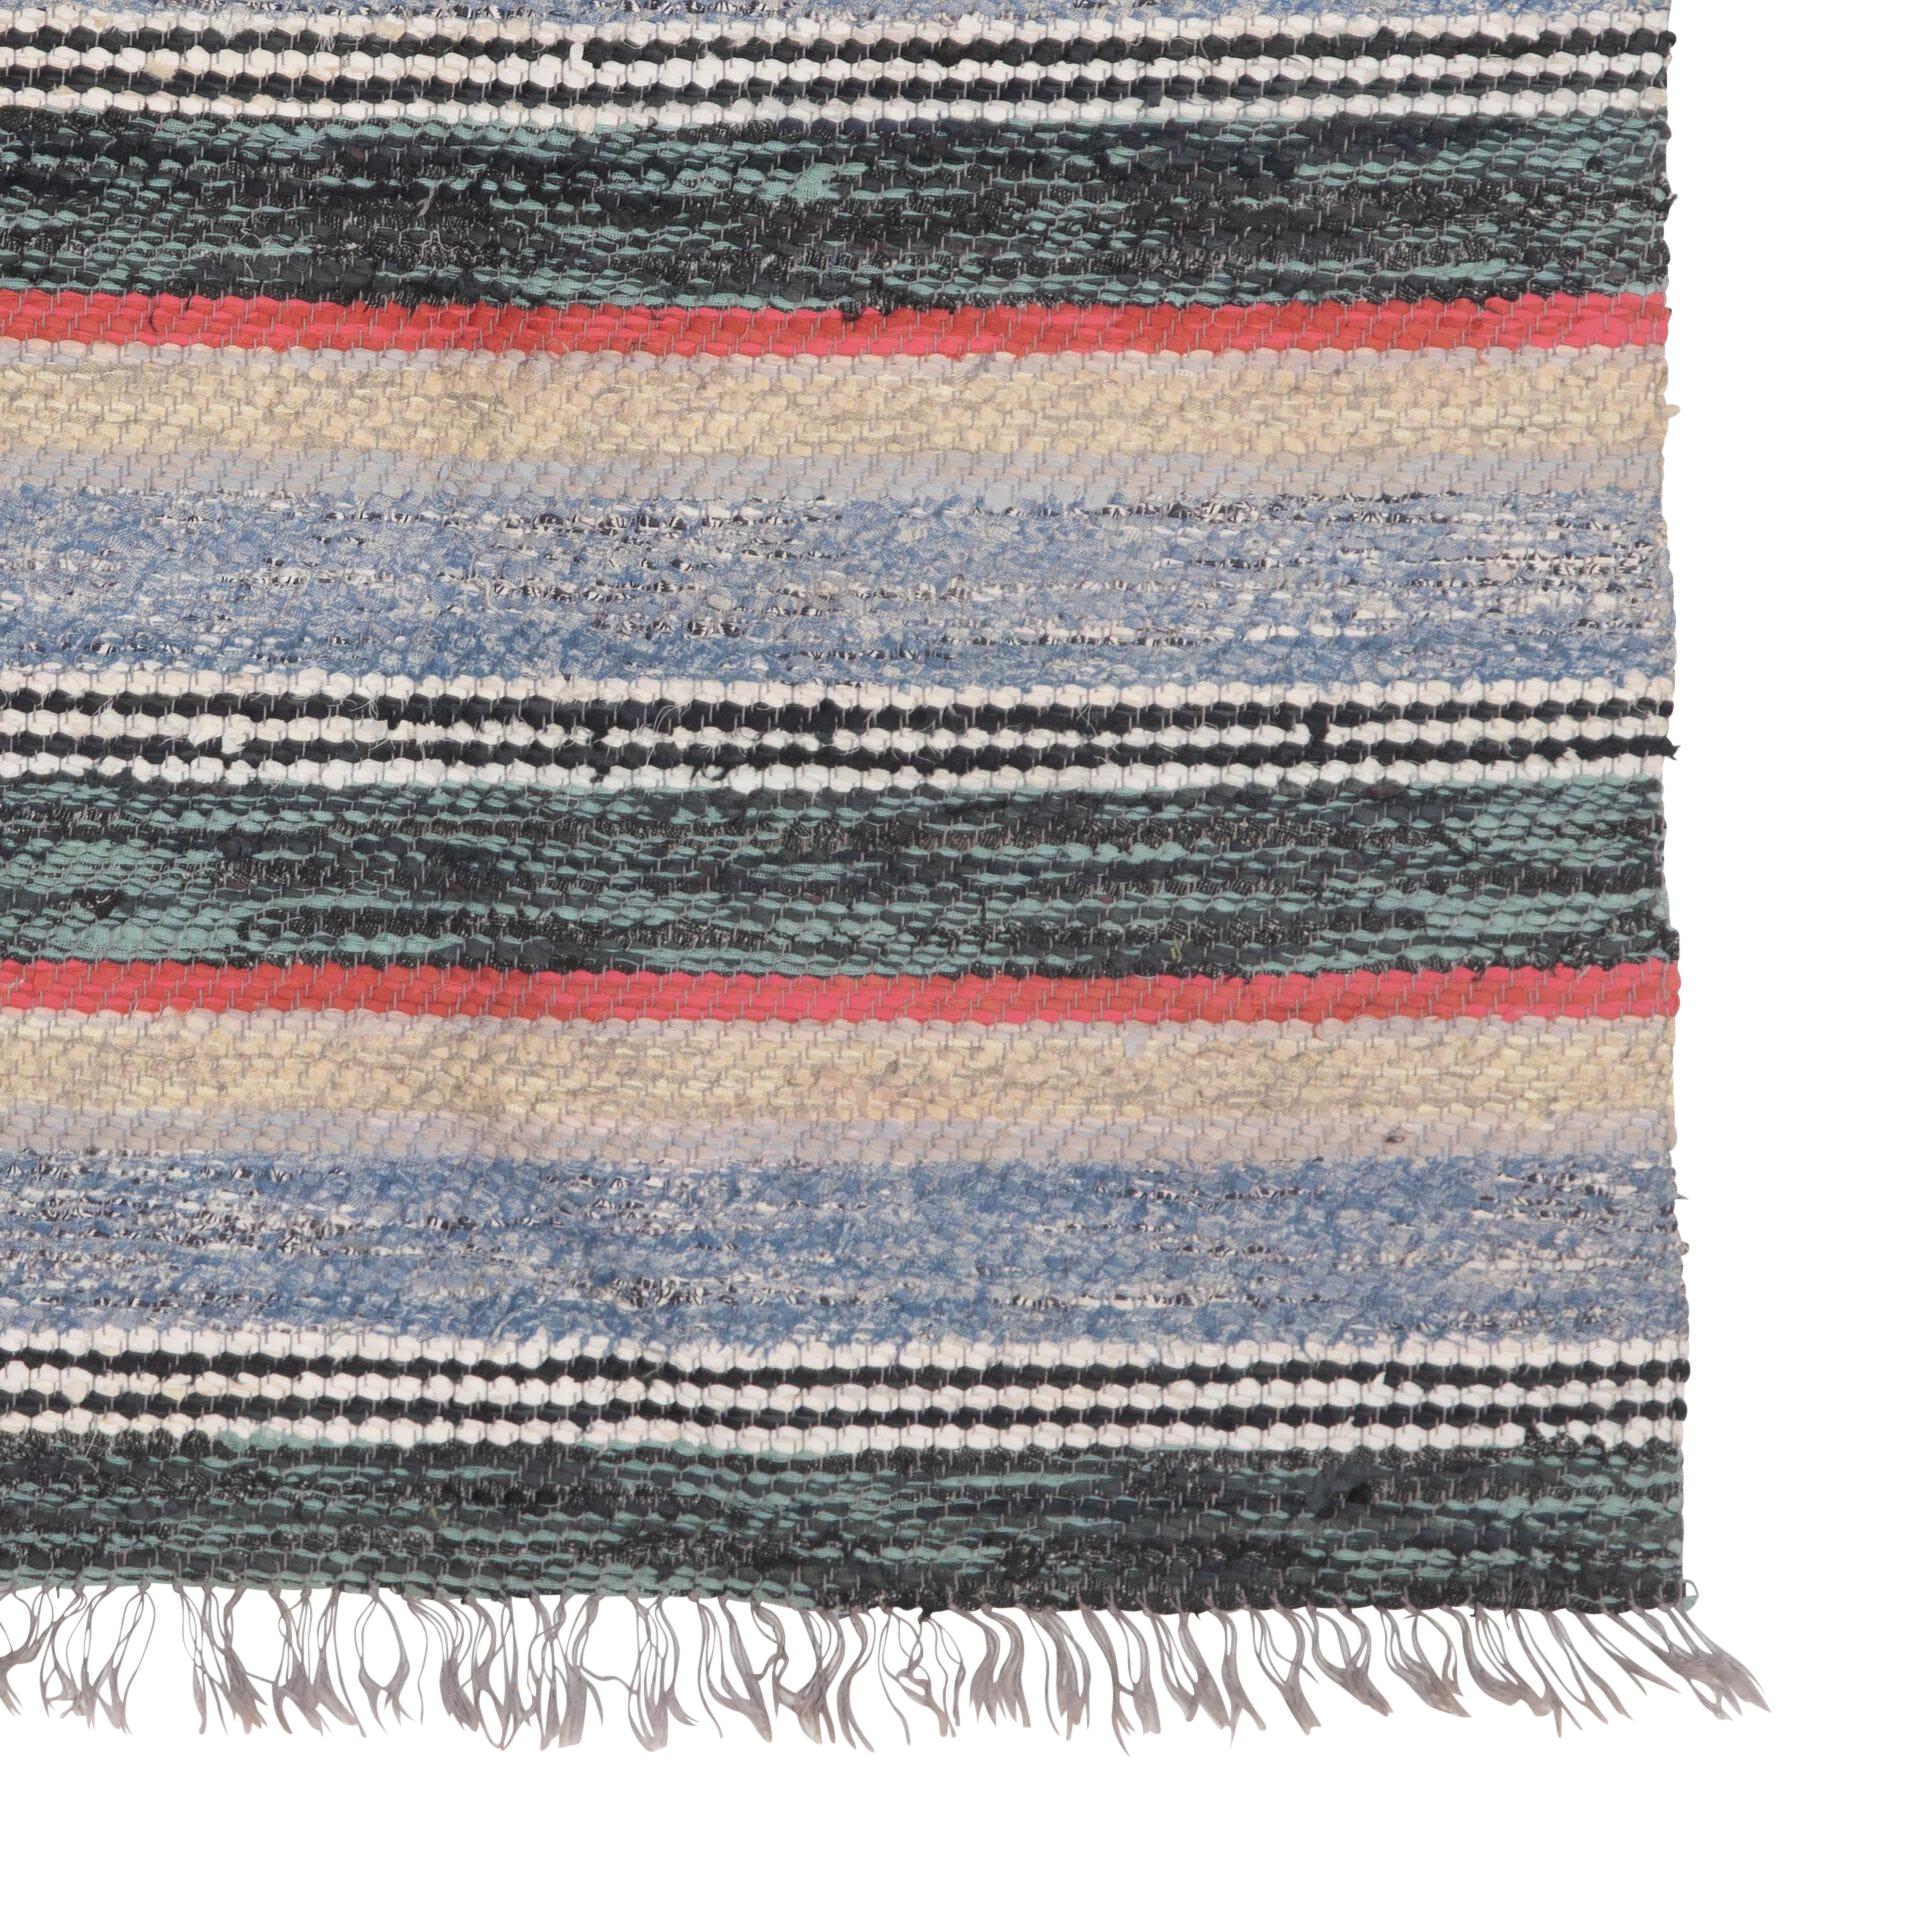 Traditional 20th Century Swedish rug in green, blue and pink.
With a striped design throughout. 
Circa 1950. 